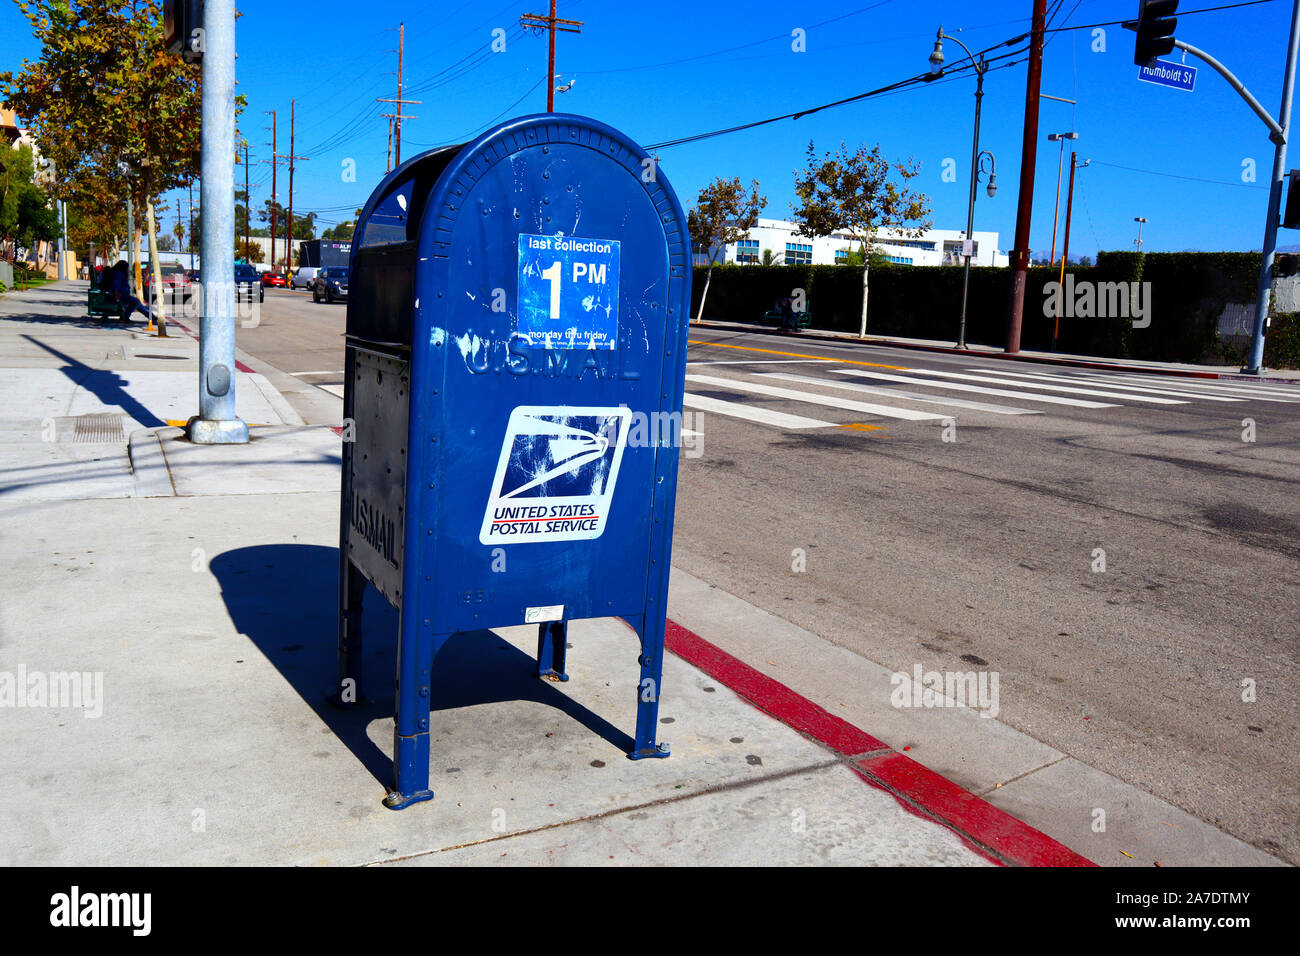 Usps United States Postal Service Mail Collection Box In Los Angeles Stockfotografie Alamy